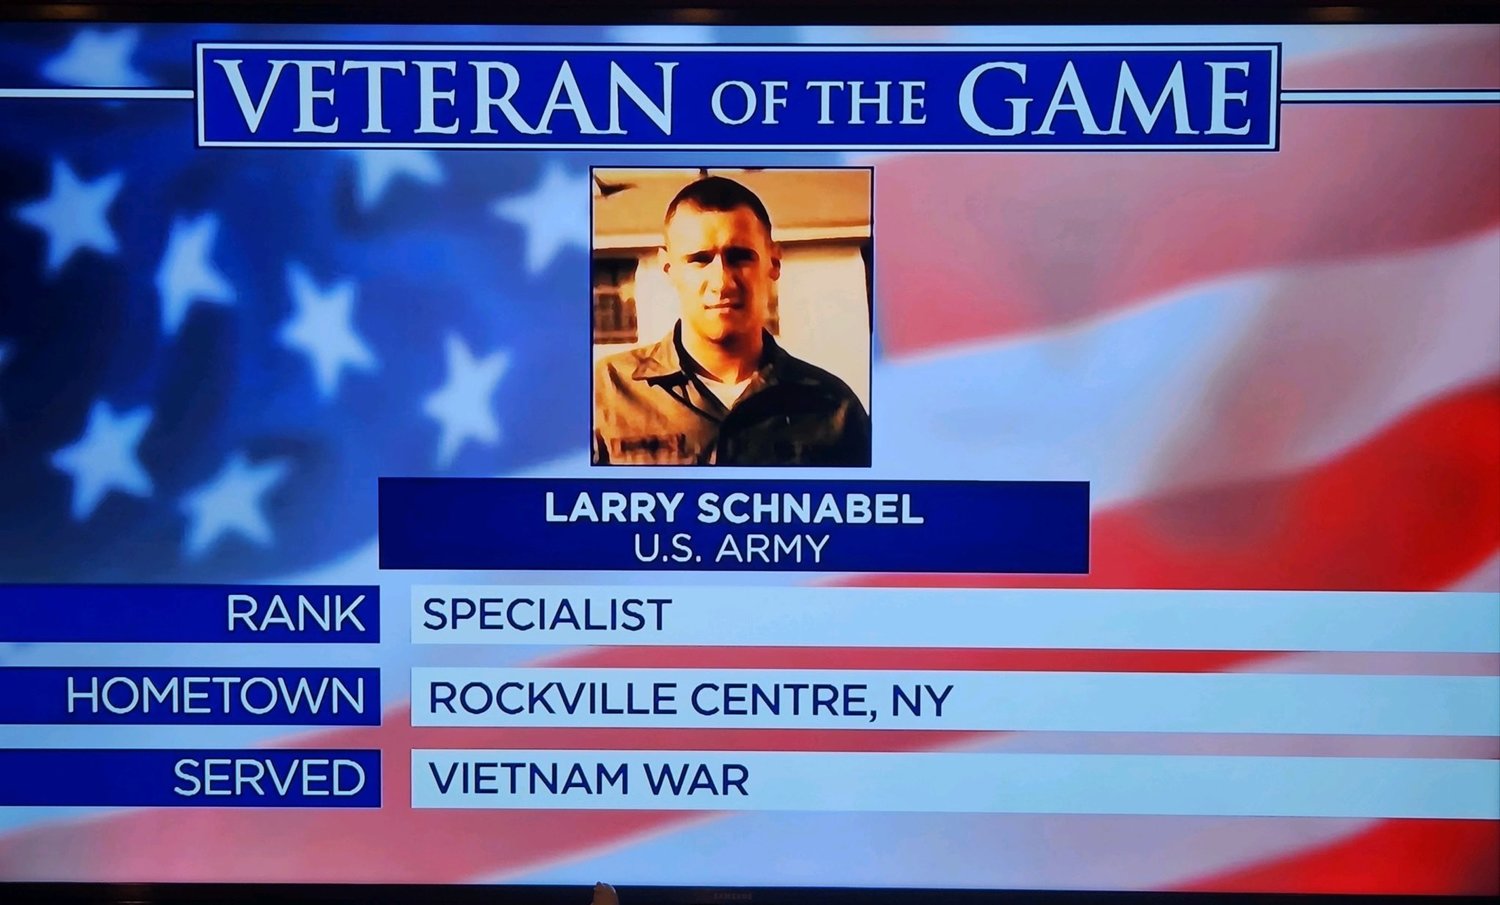 Larry Schnabel said he wanted more veterans to be recognized for their service.